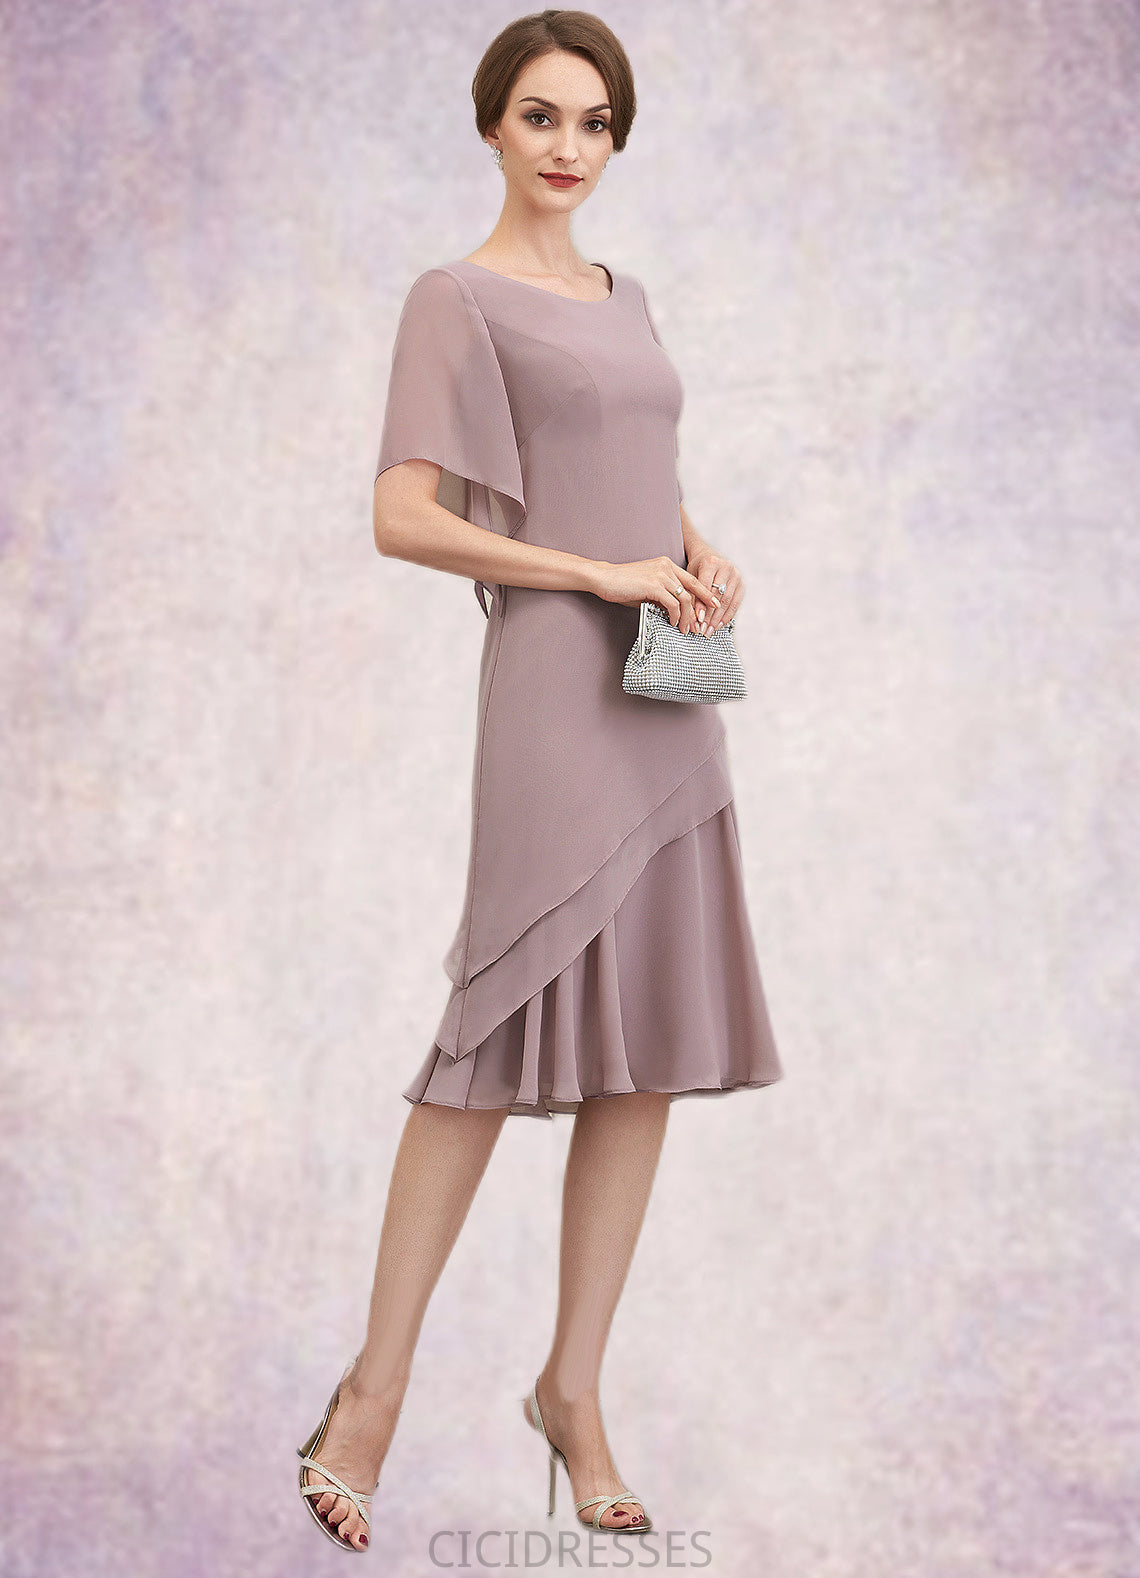 Aurora A-Line Scoop Neck Knee-Length Chiffon Mother of the Bride Dress With Cascading Ruffles CIC8126P0014755